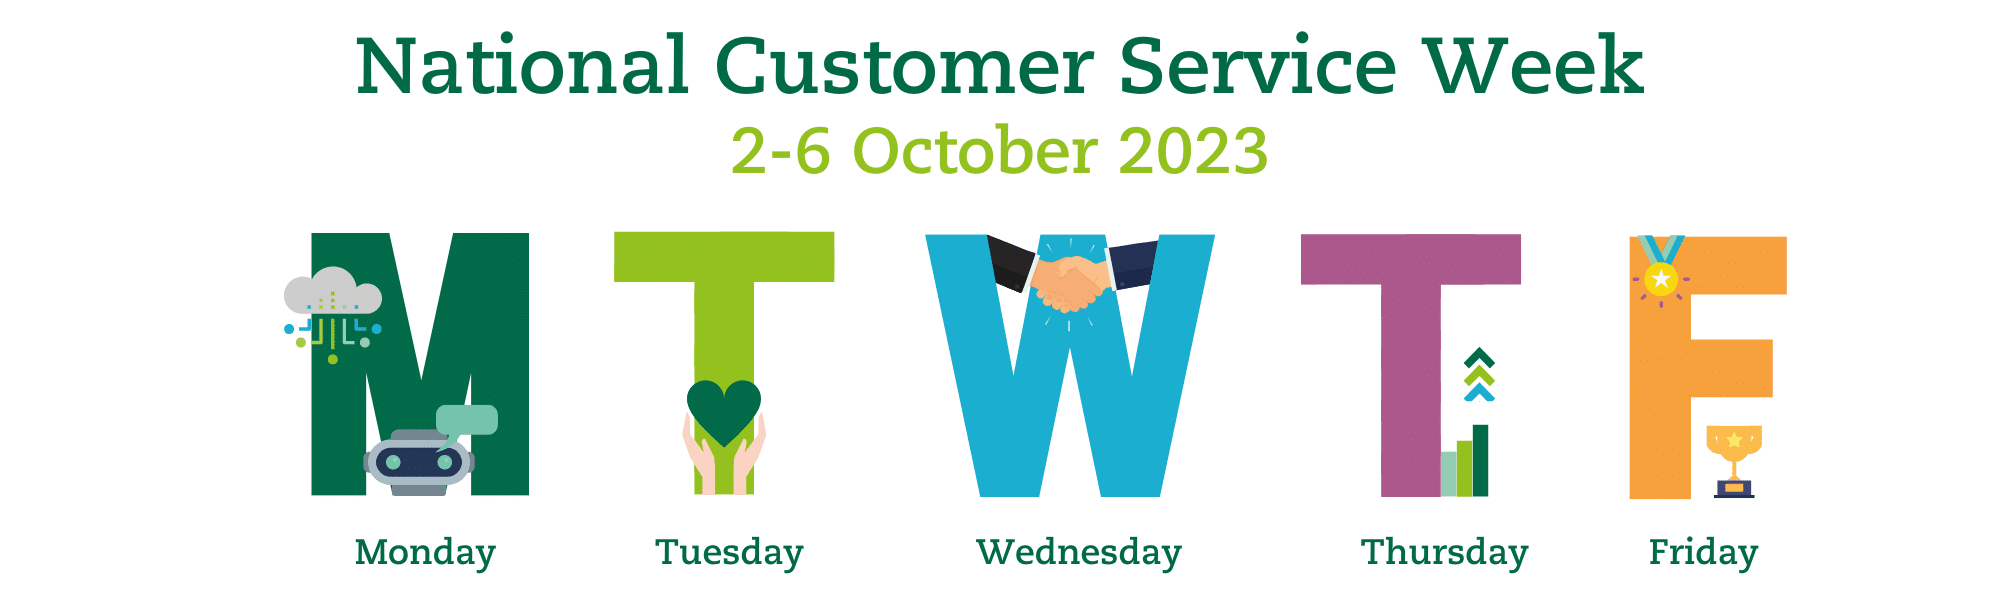 National Customer Services week NCSW 2023